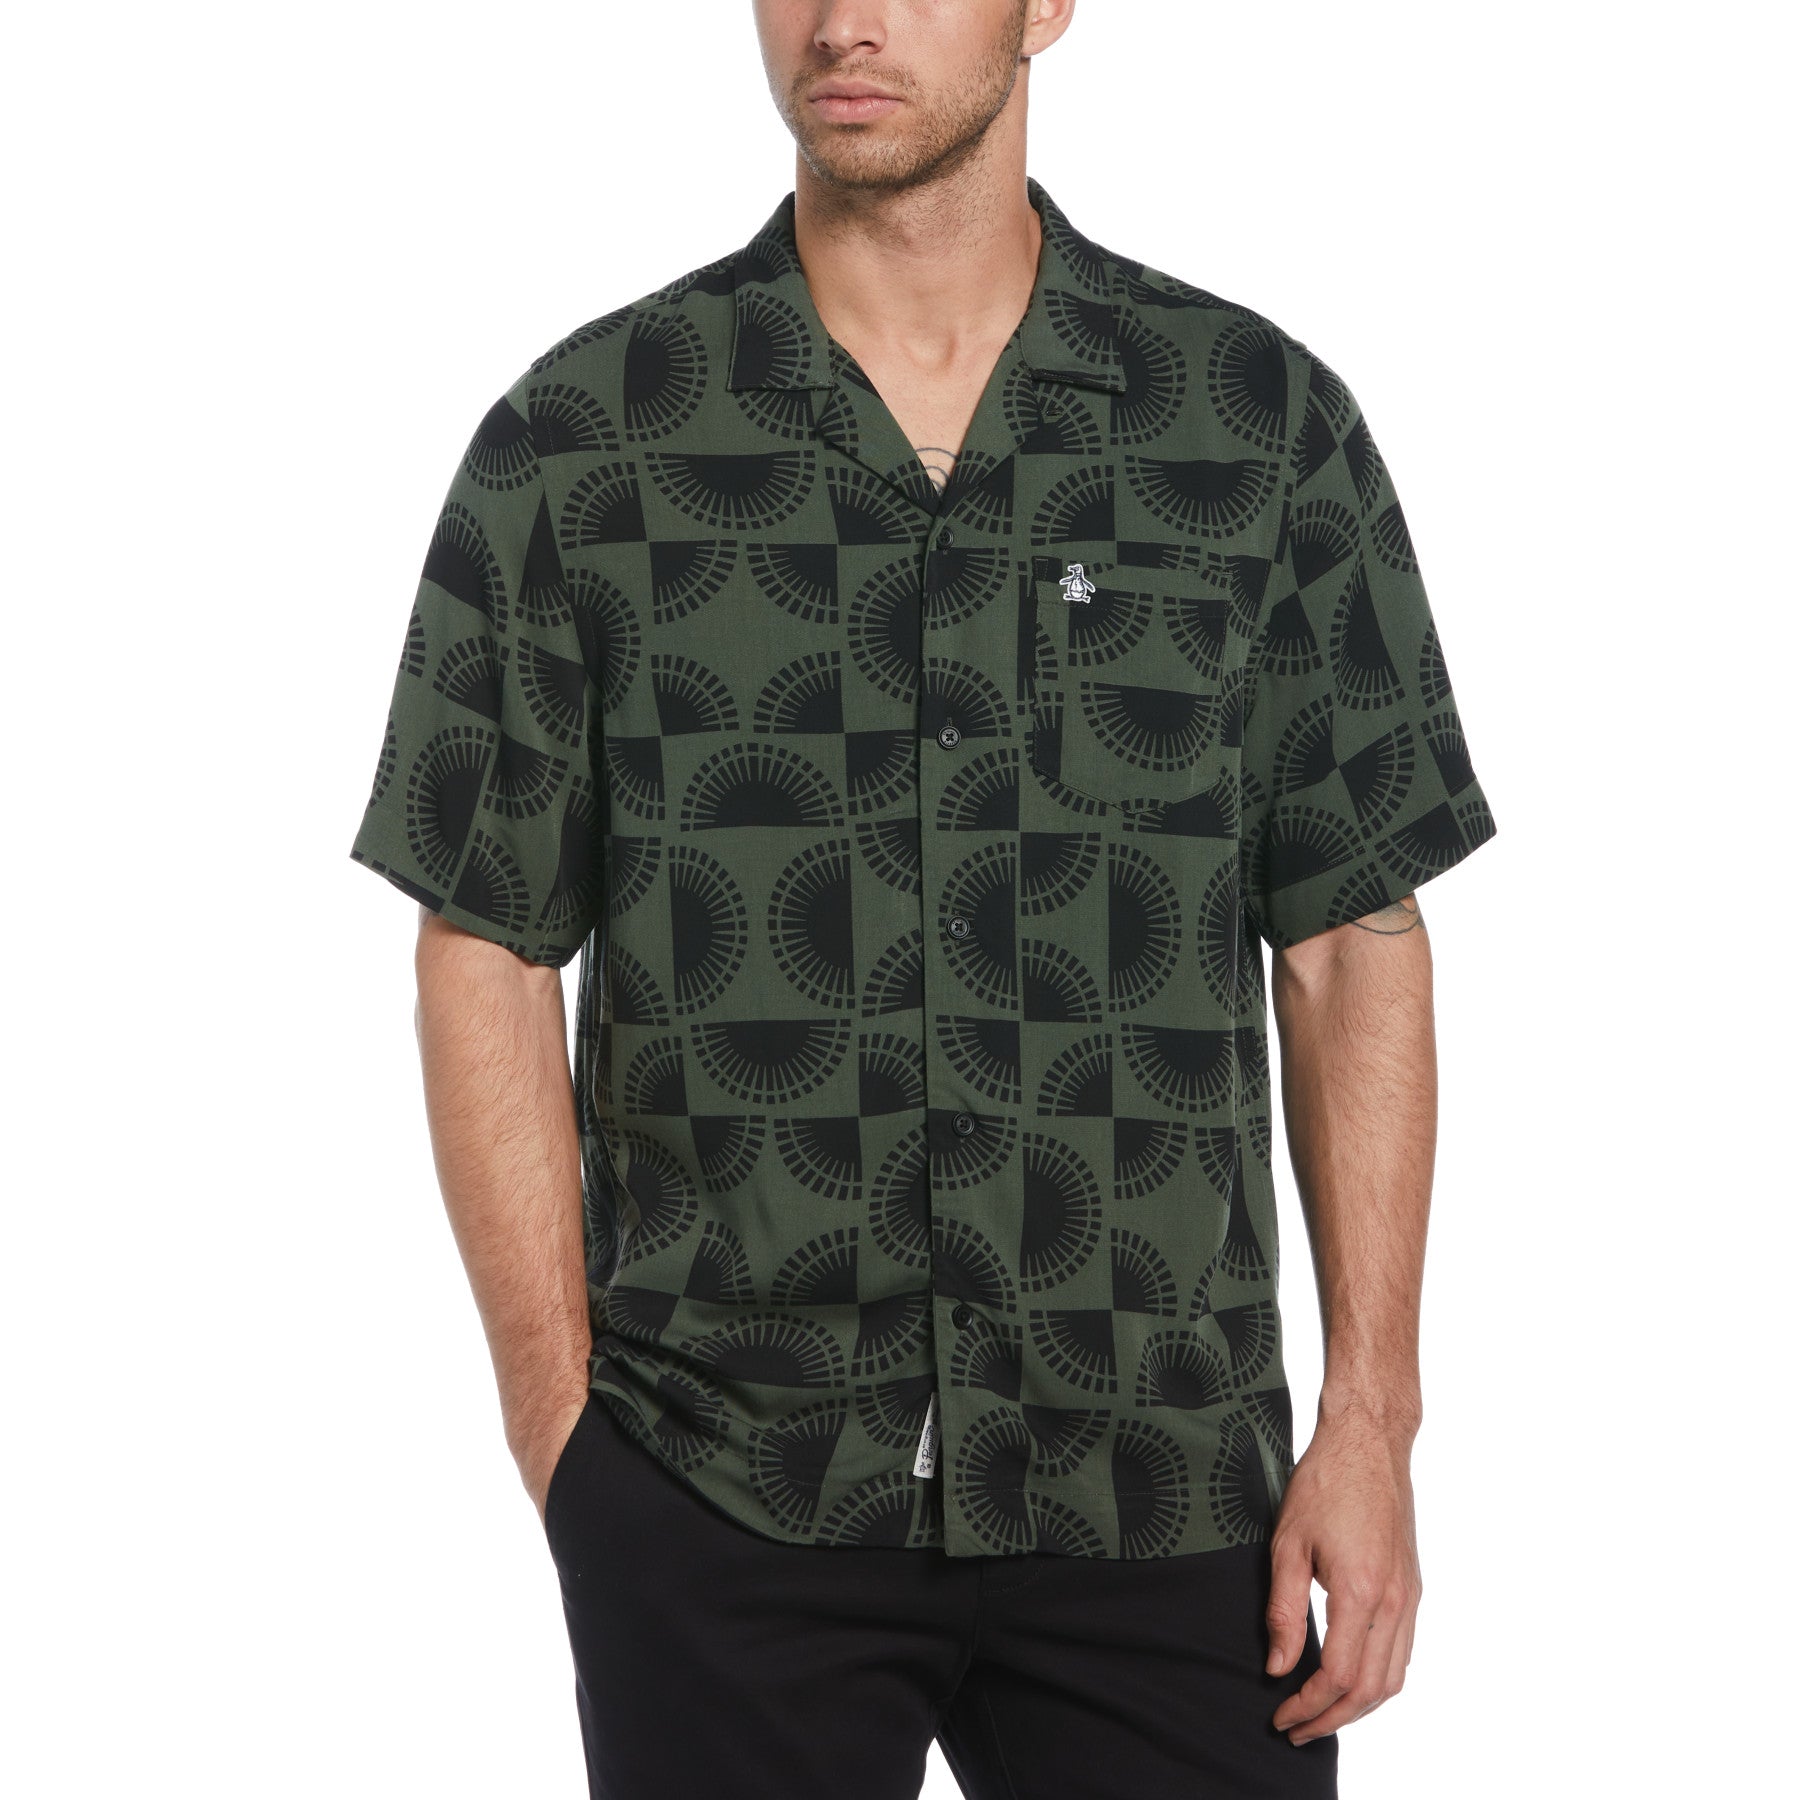 View Ecovero Print Shirt In Deep Forest information